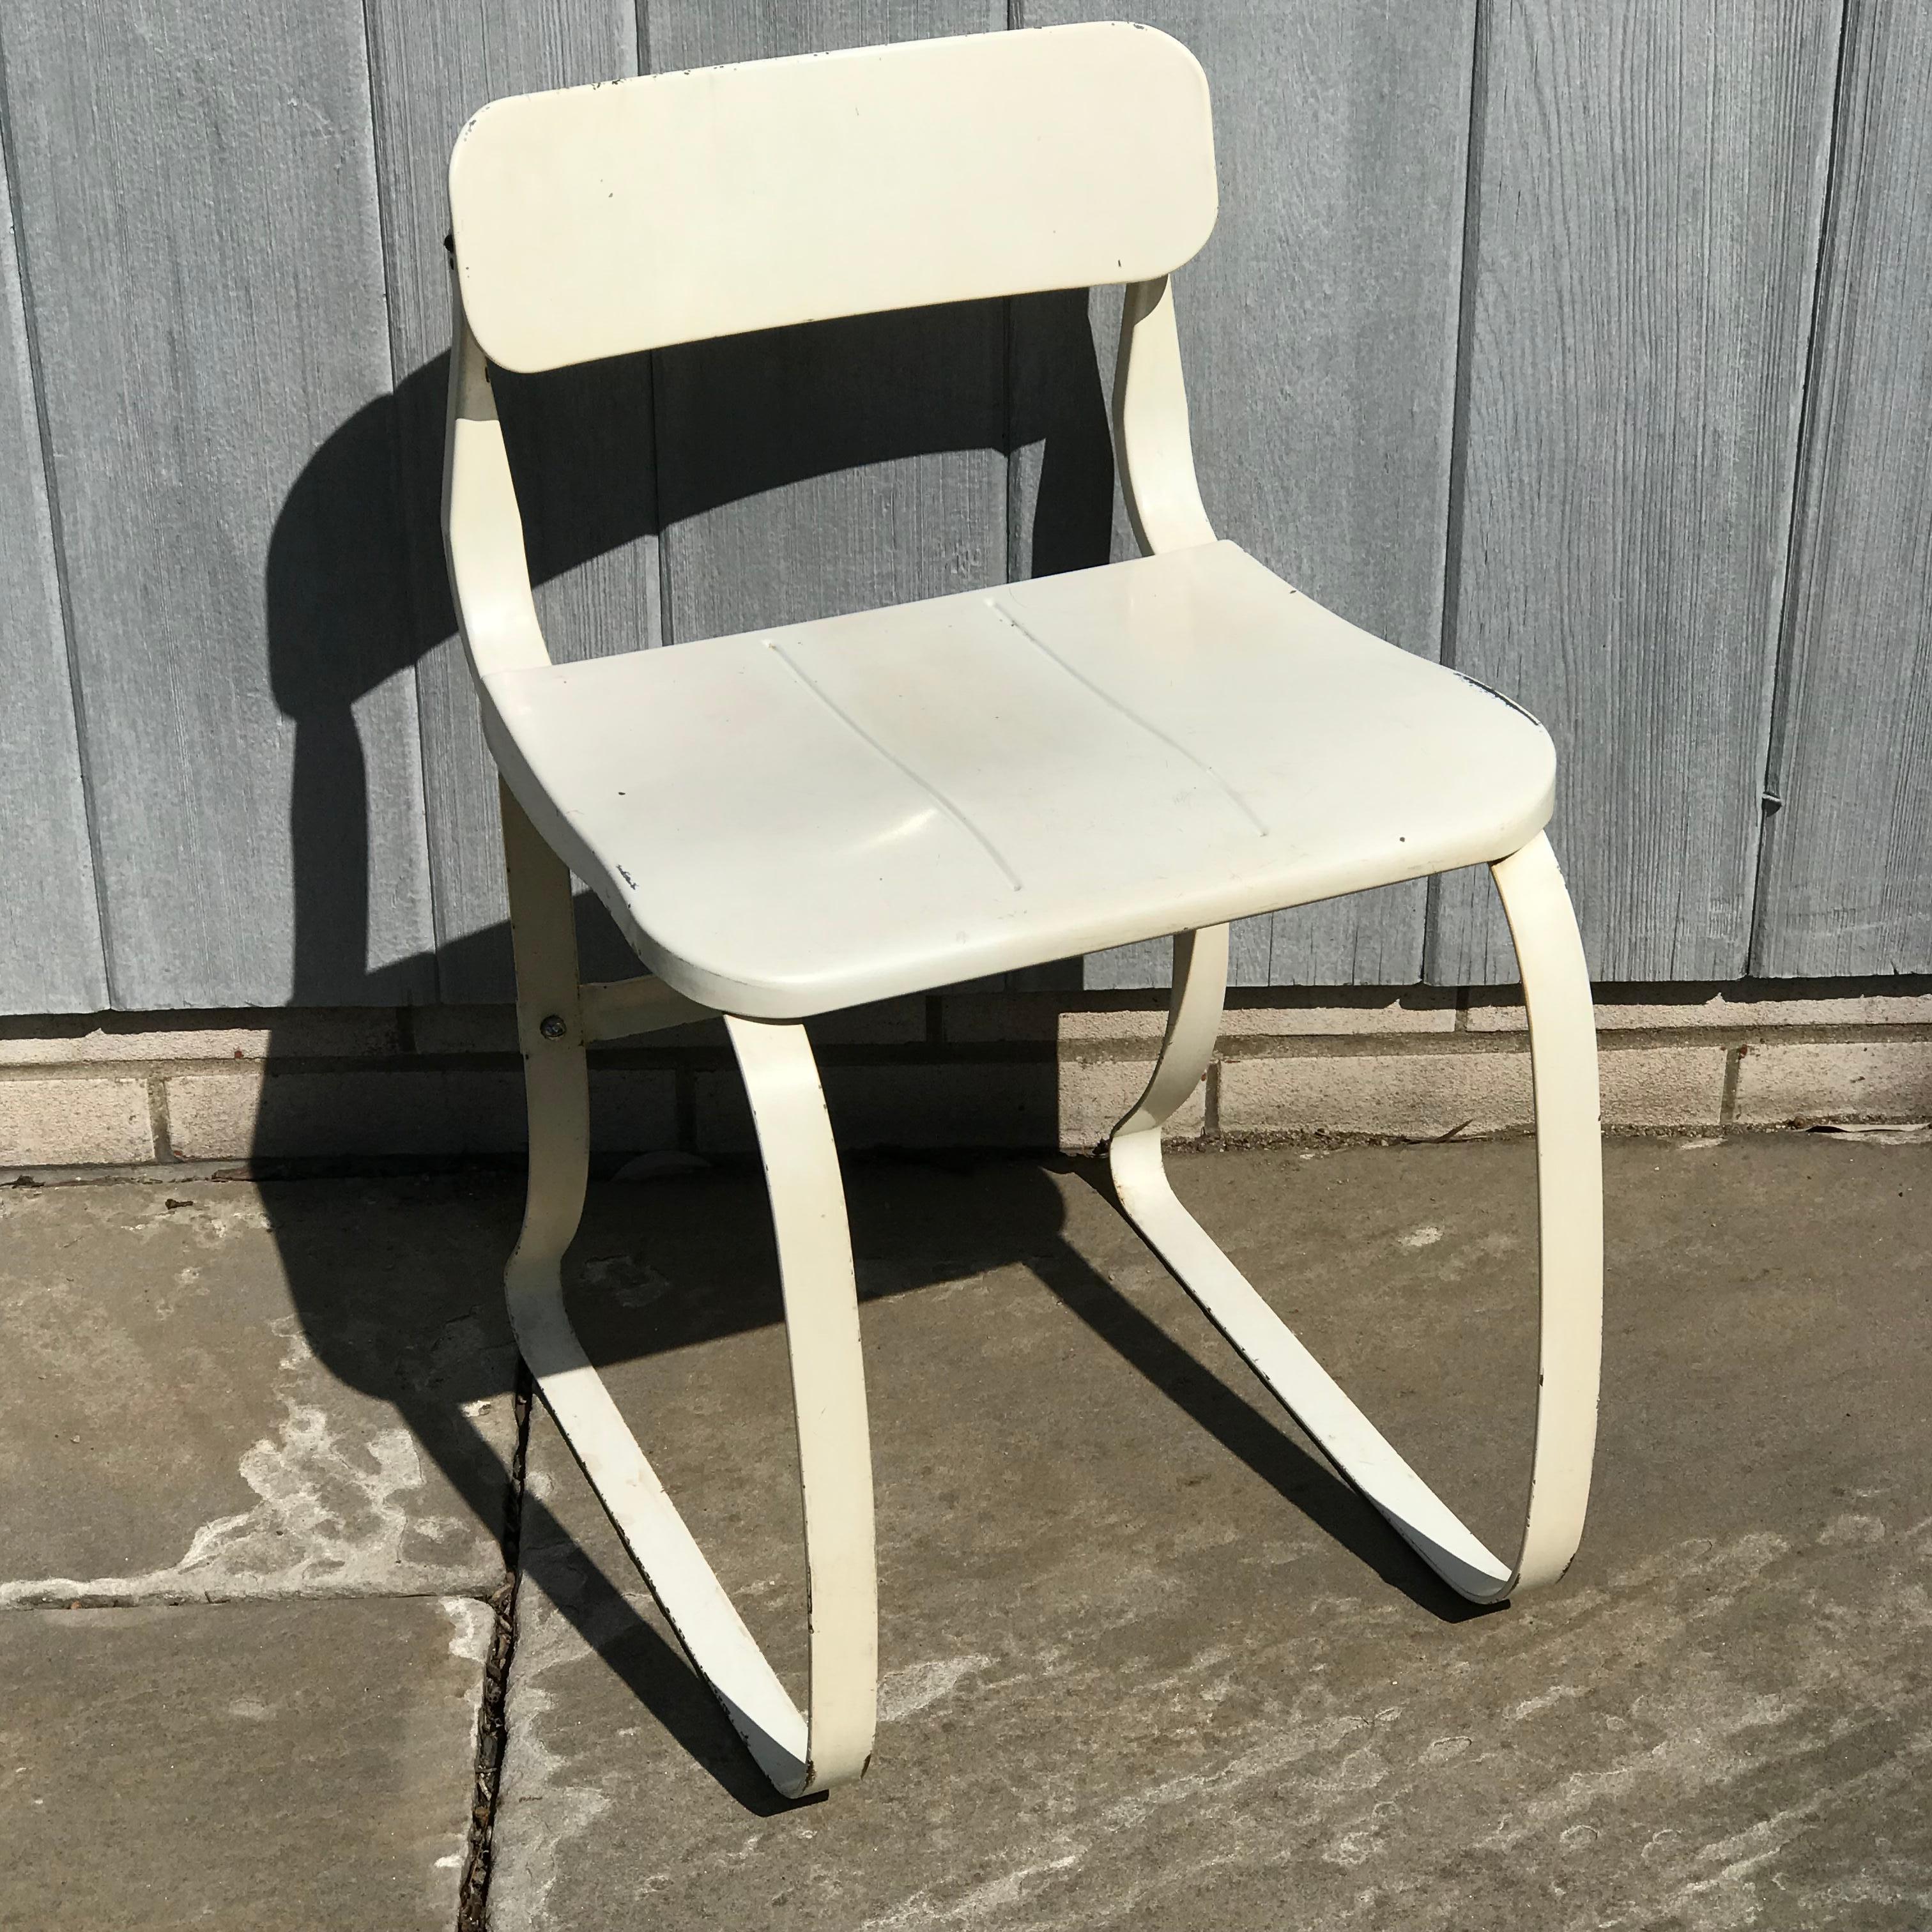 An unusual Ironrite Health Chair designed by Herman Sperlich in a lovely white enameled steel frame and seat.